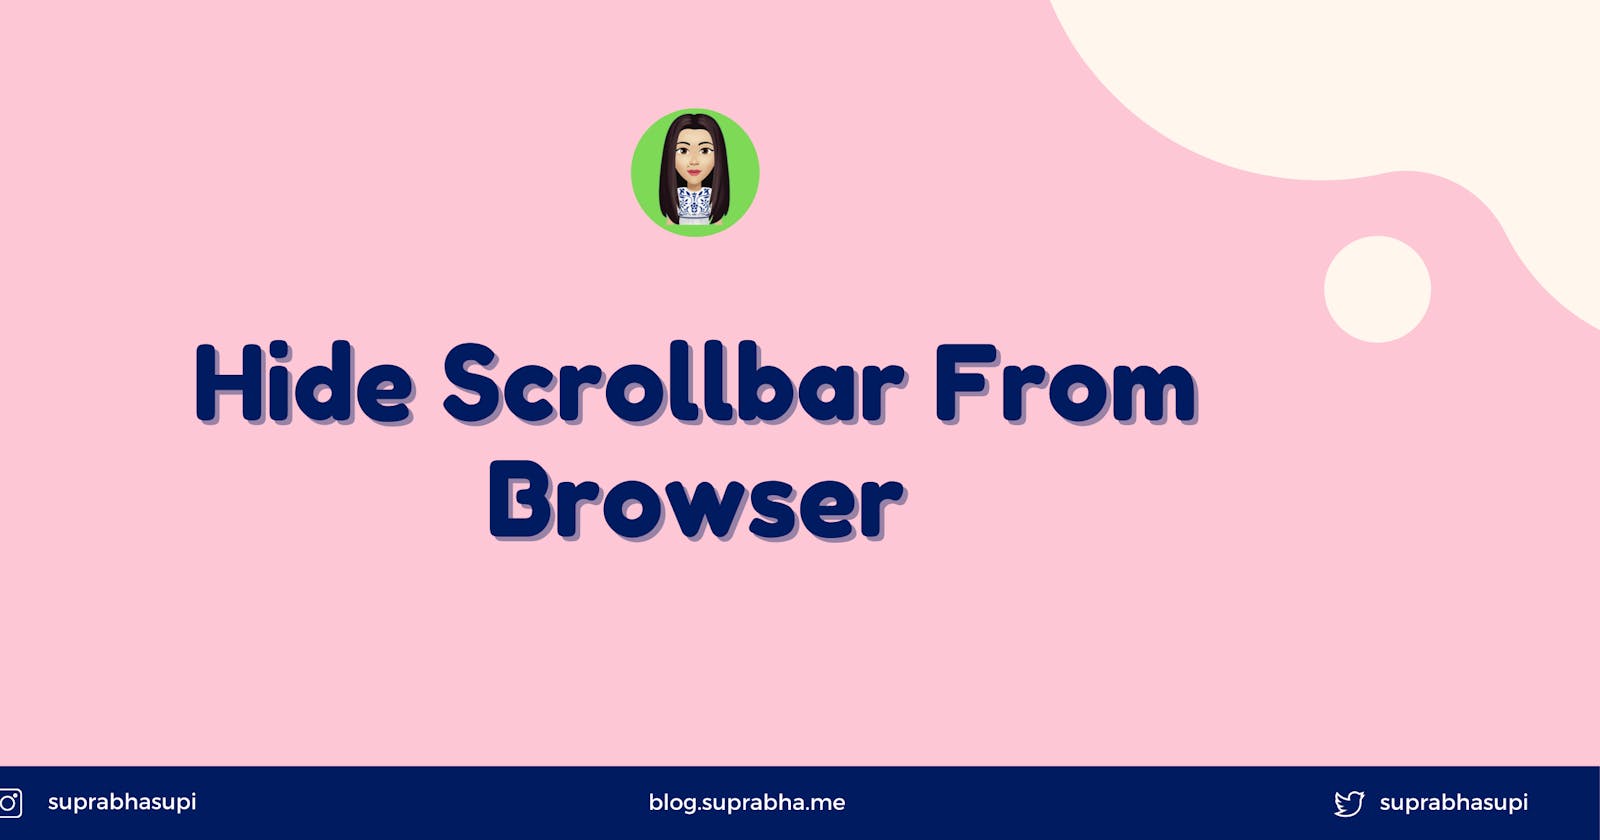 Hide Scrollbar From Browser